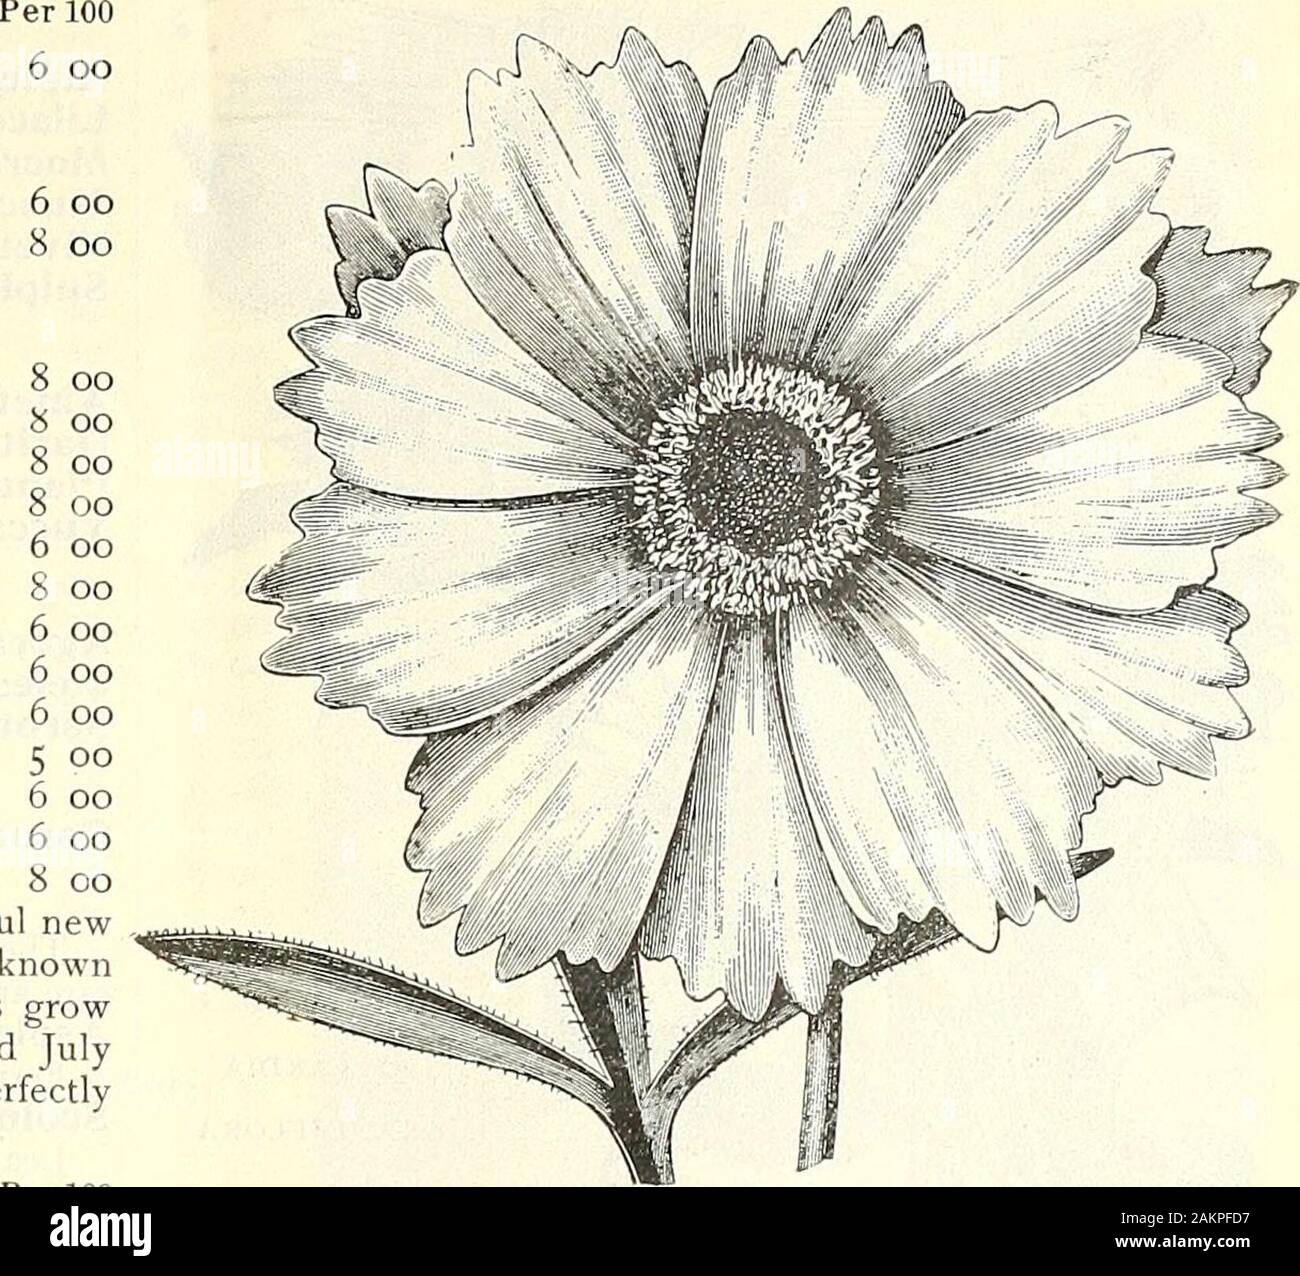 Dreer's wholesale price list for 1904 : decorative hardy garden greenhouse and other plants bulbs tools, fertilizers, insecticides, sundries, etc . .Cordata. Strong divisions 75 Boltonia. (False chamomile.) Asteroides. Divisions 75 Latisquama. 4-inch pots i 00 Campanula. (Bell Flower.)Alliariaefolia. Strong divisions ... i 00Carpatica. Blue. 3-inch pots .... i 00 White. 3-inch pots . . I 00 Csespitosa. j-inch pots i 00 Glomerata. 3-inch pots 75 Grandis. Strong plants I 00 Qrossekii. Strong divisions 75 Latifolia Macrantha. 3-inch pots . 75 Media. (Canterbury Bells.) 4-inch pots . 75 Nobilis. 3 Stock Photo